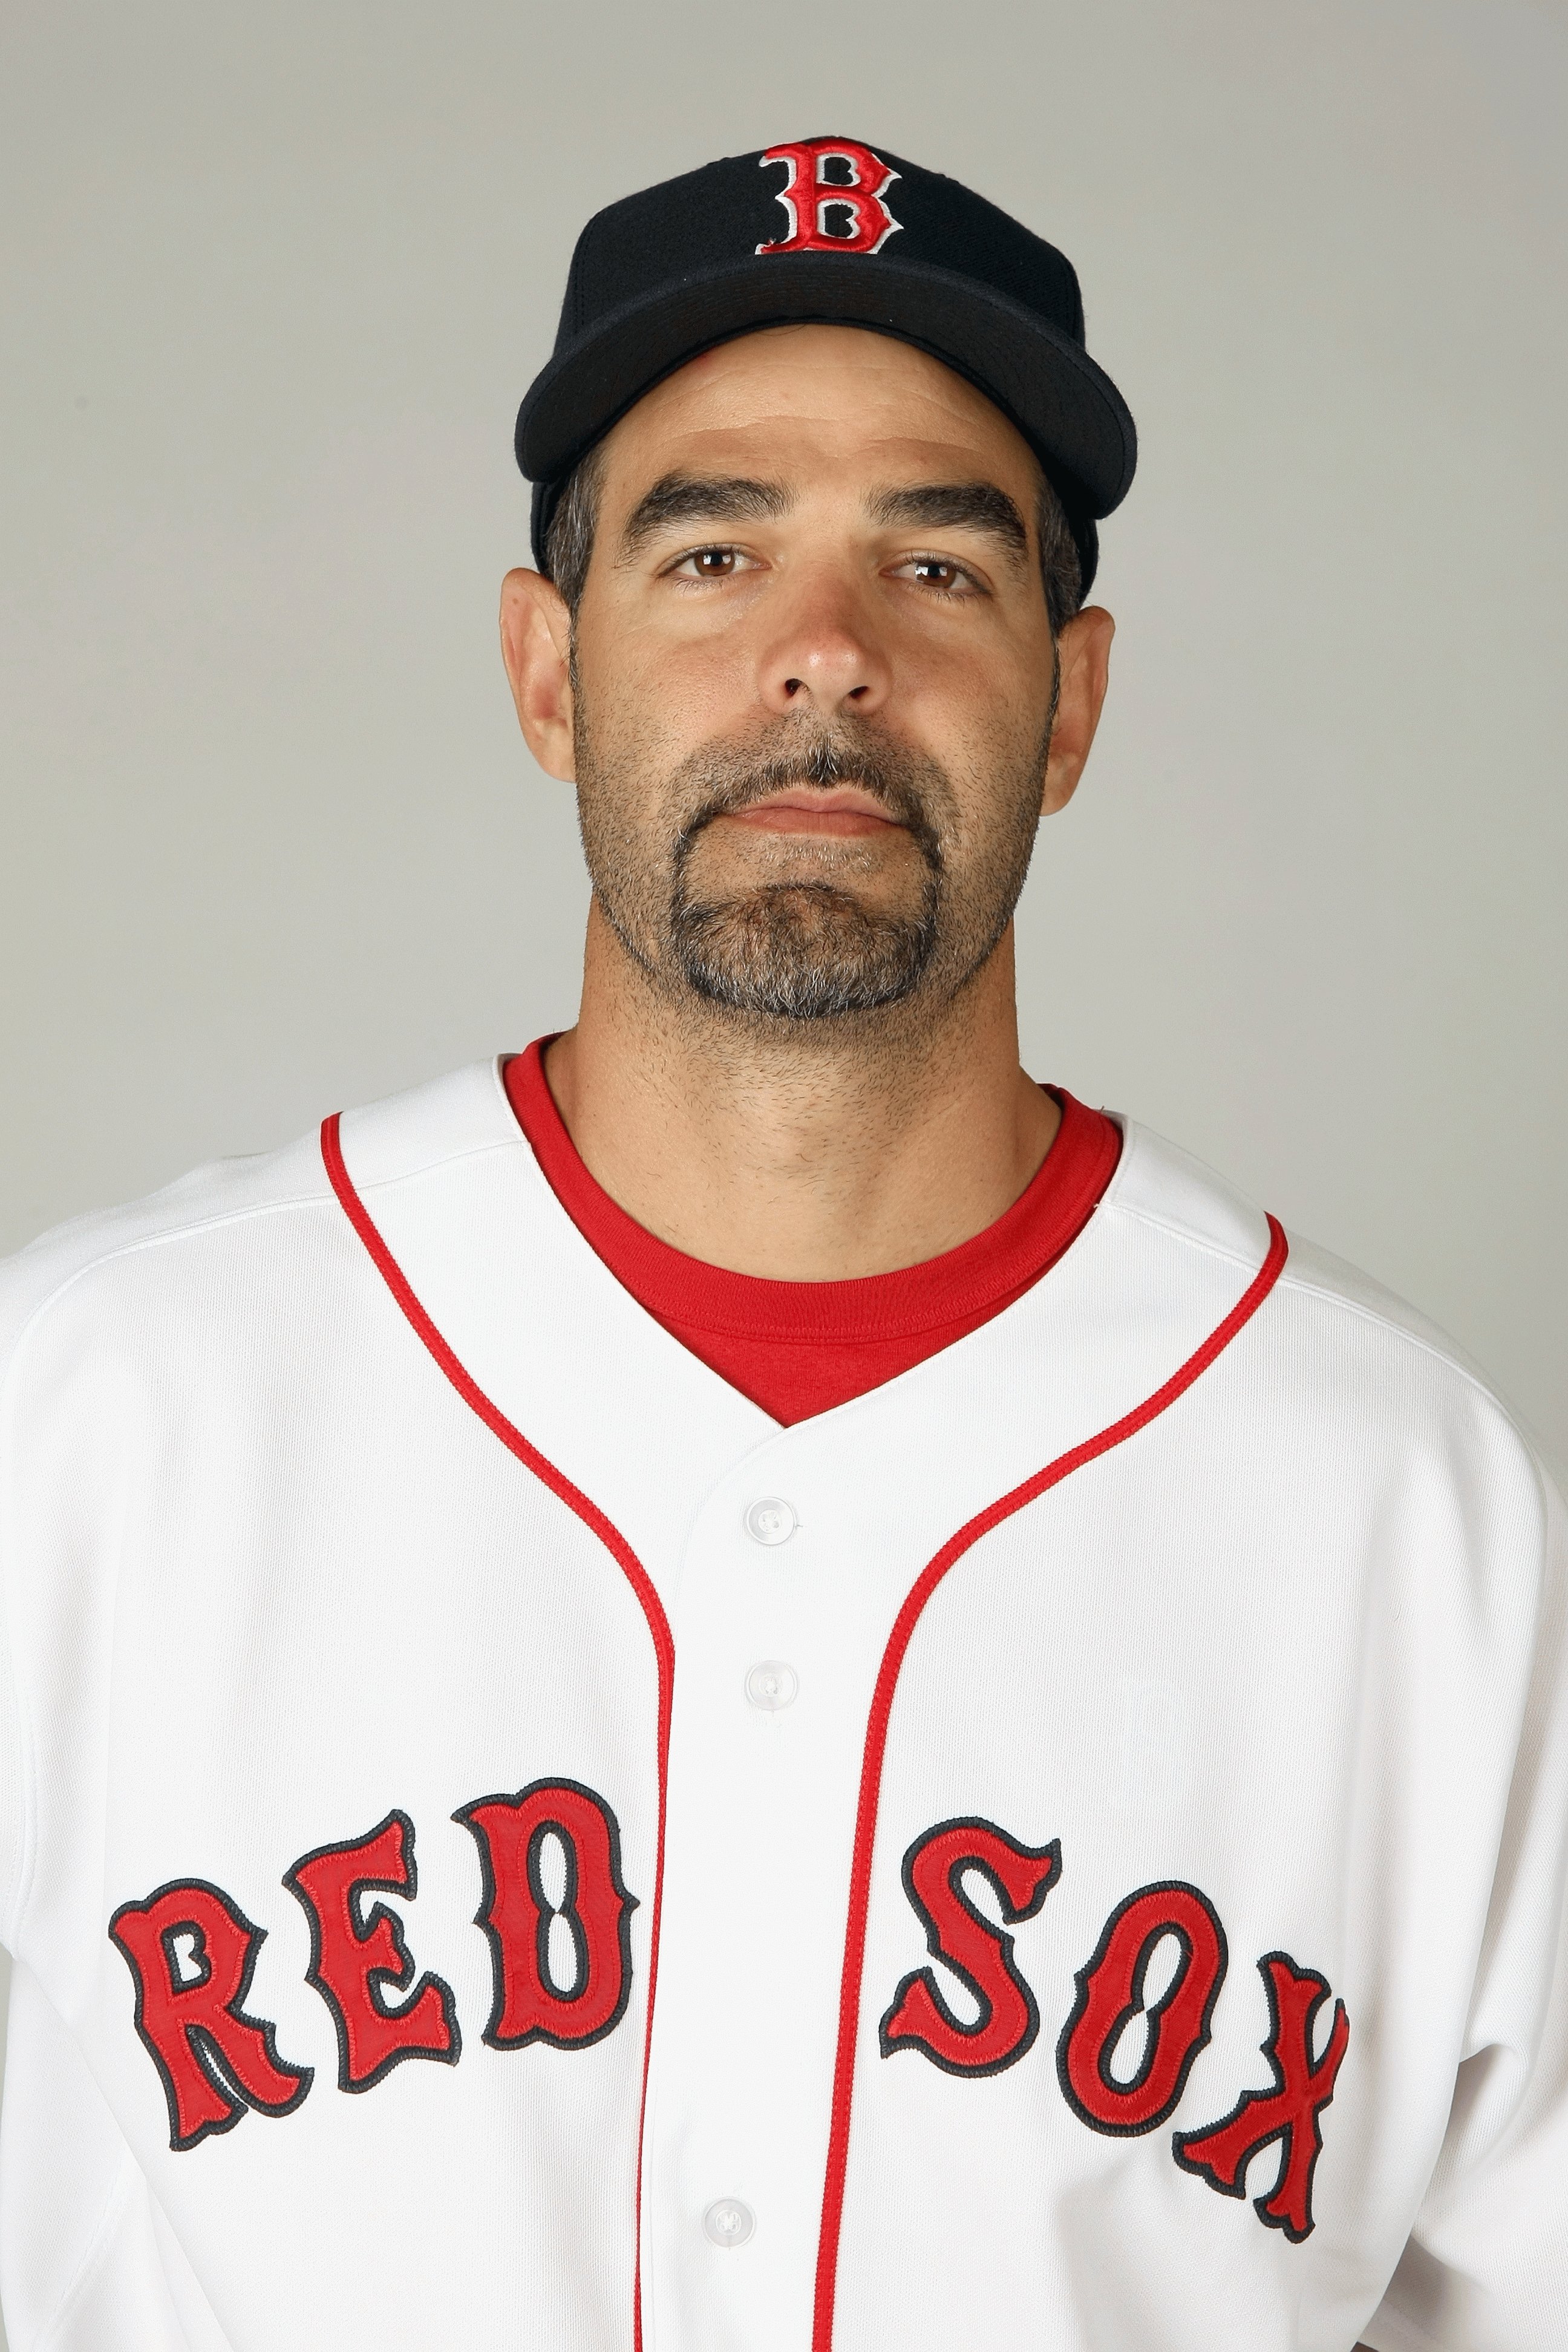 20 August 2009: Boston Red Sox 3rd baseman Mike Lowell (R) and